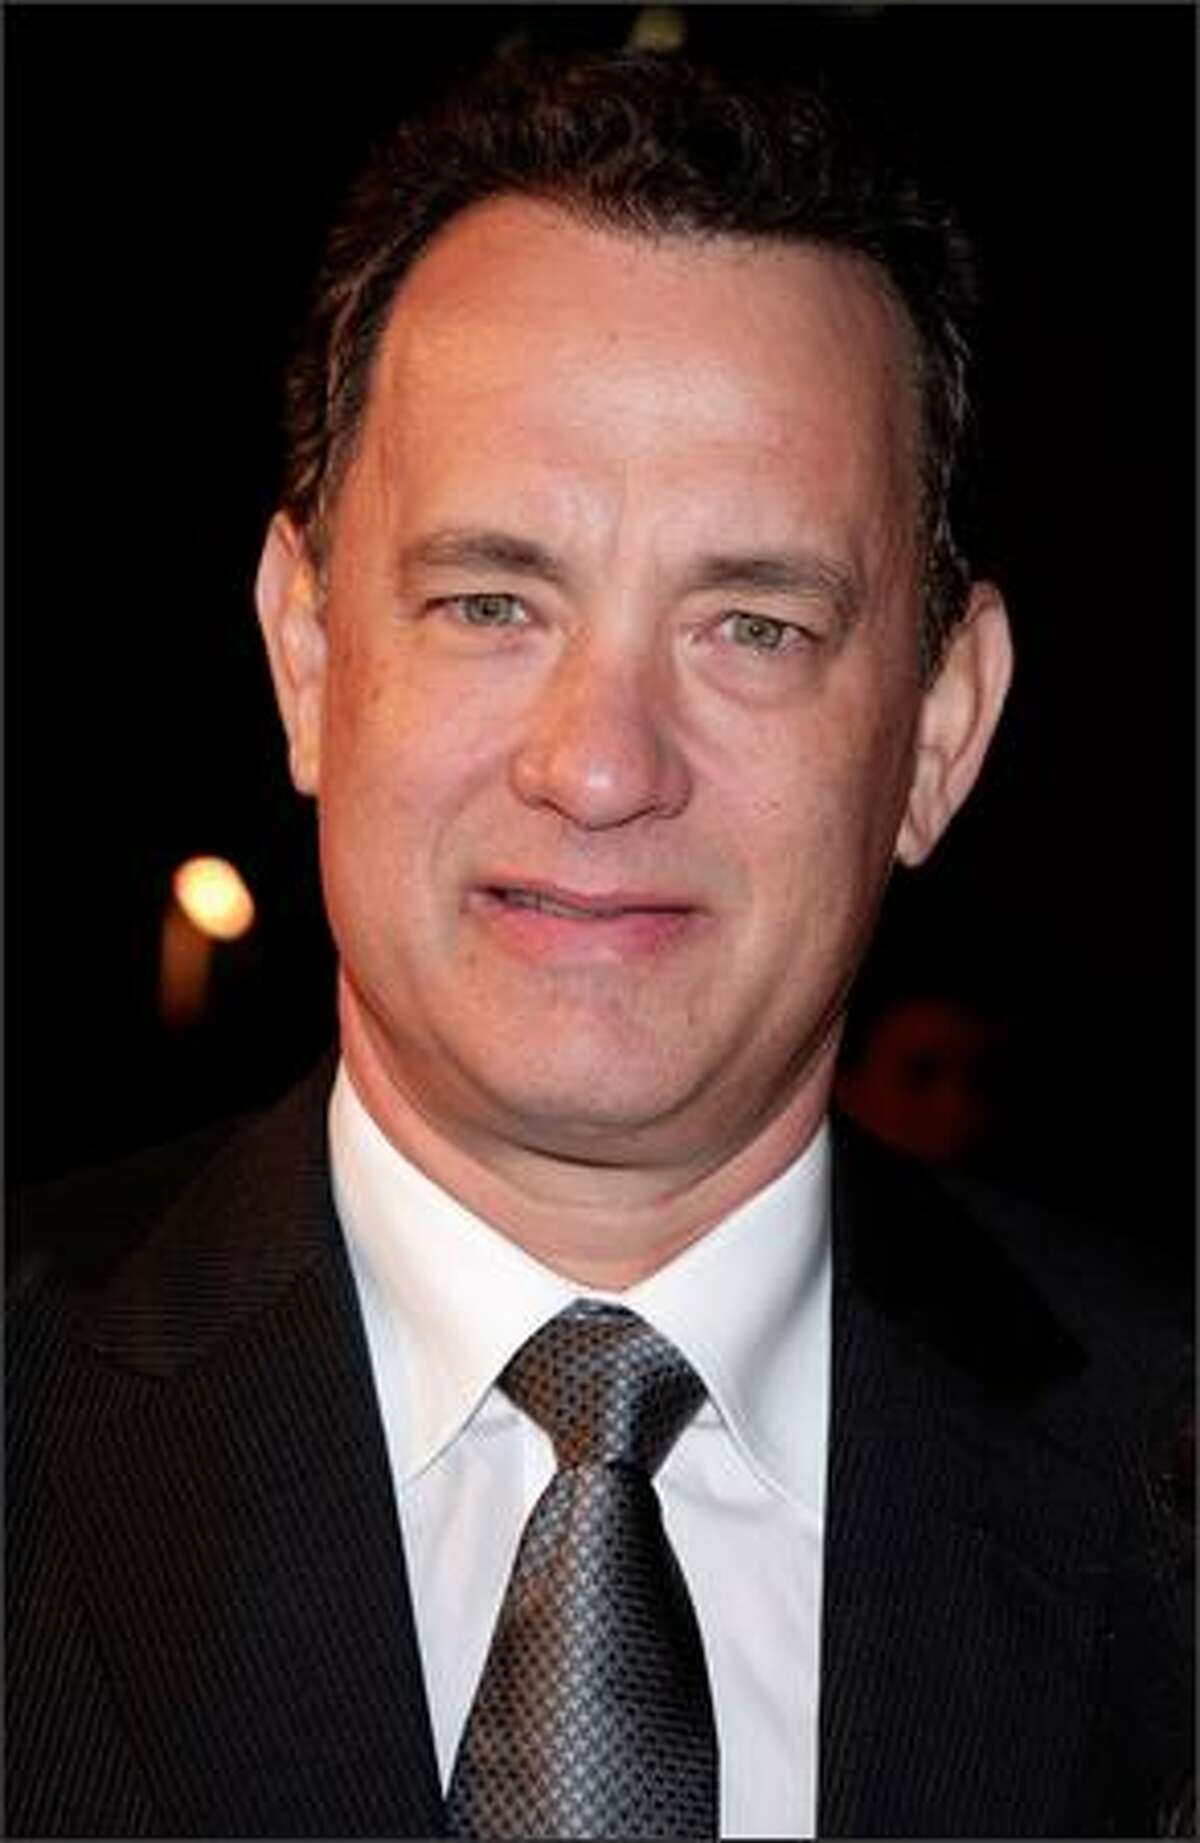 Actor Tom Hanks arrives at the Universal Pictures' premiere of "Charlie Wilson's War" held at CityWalk Cinemas on Monday in Los Angeles, Calif.